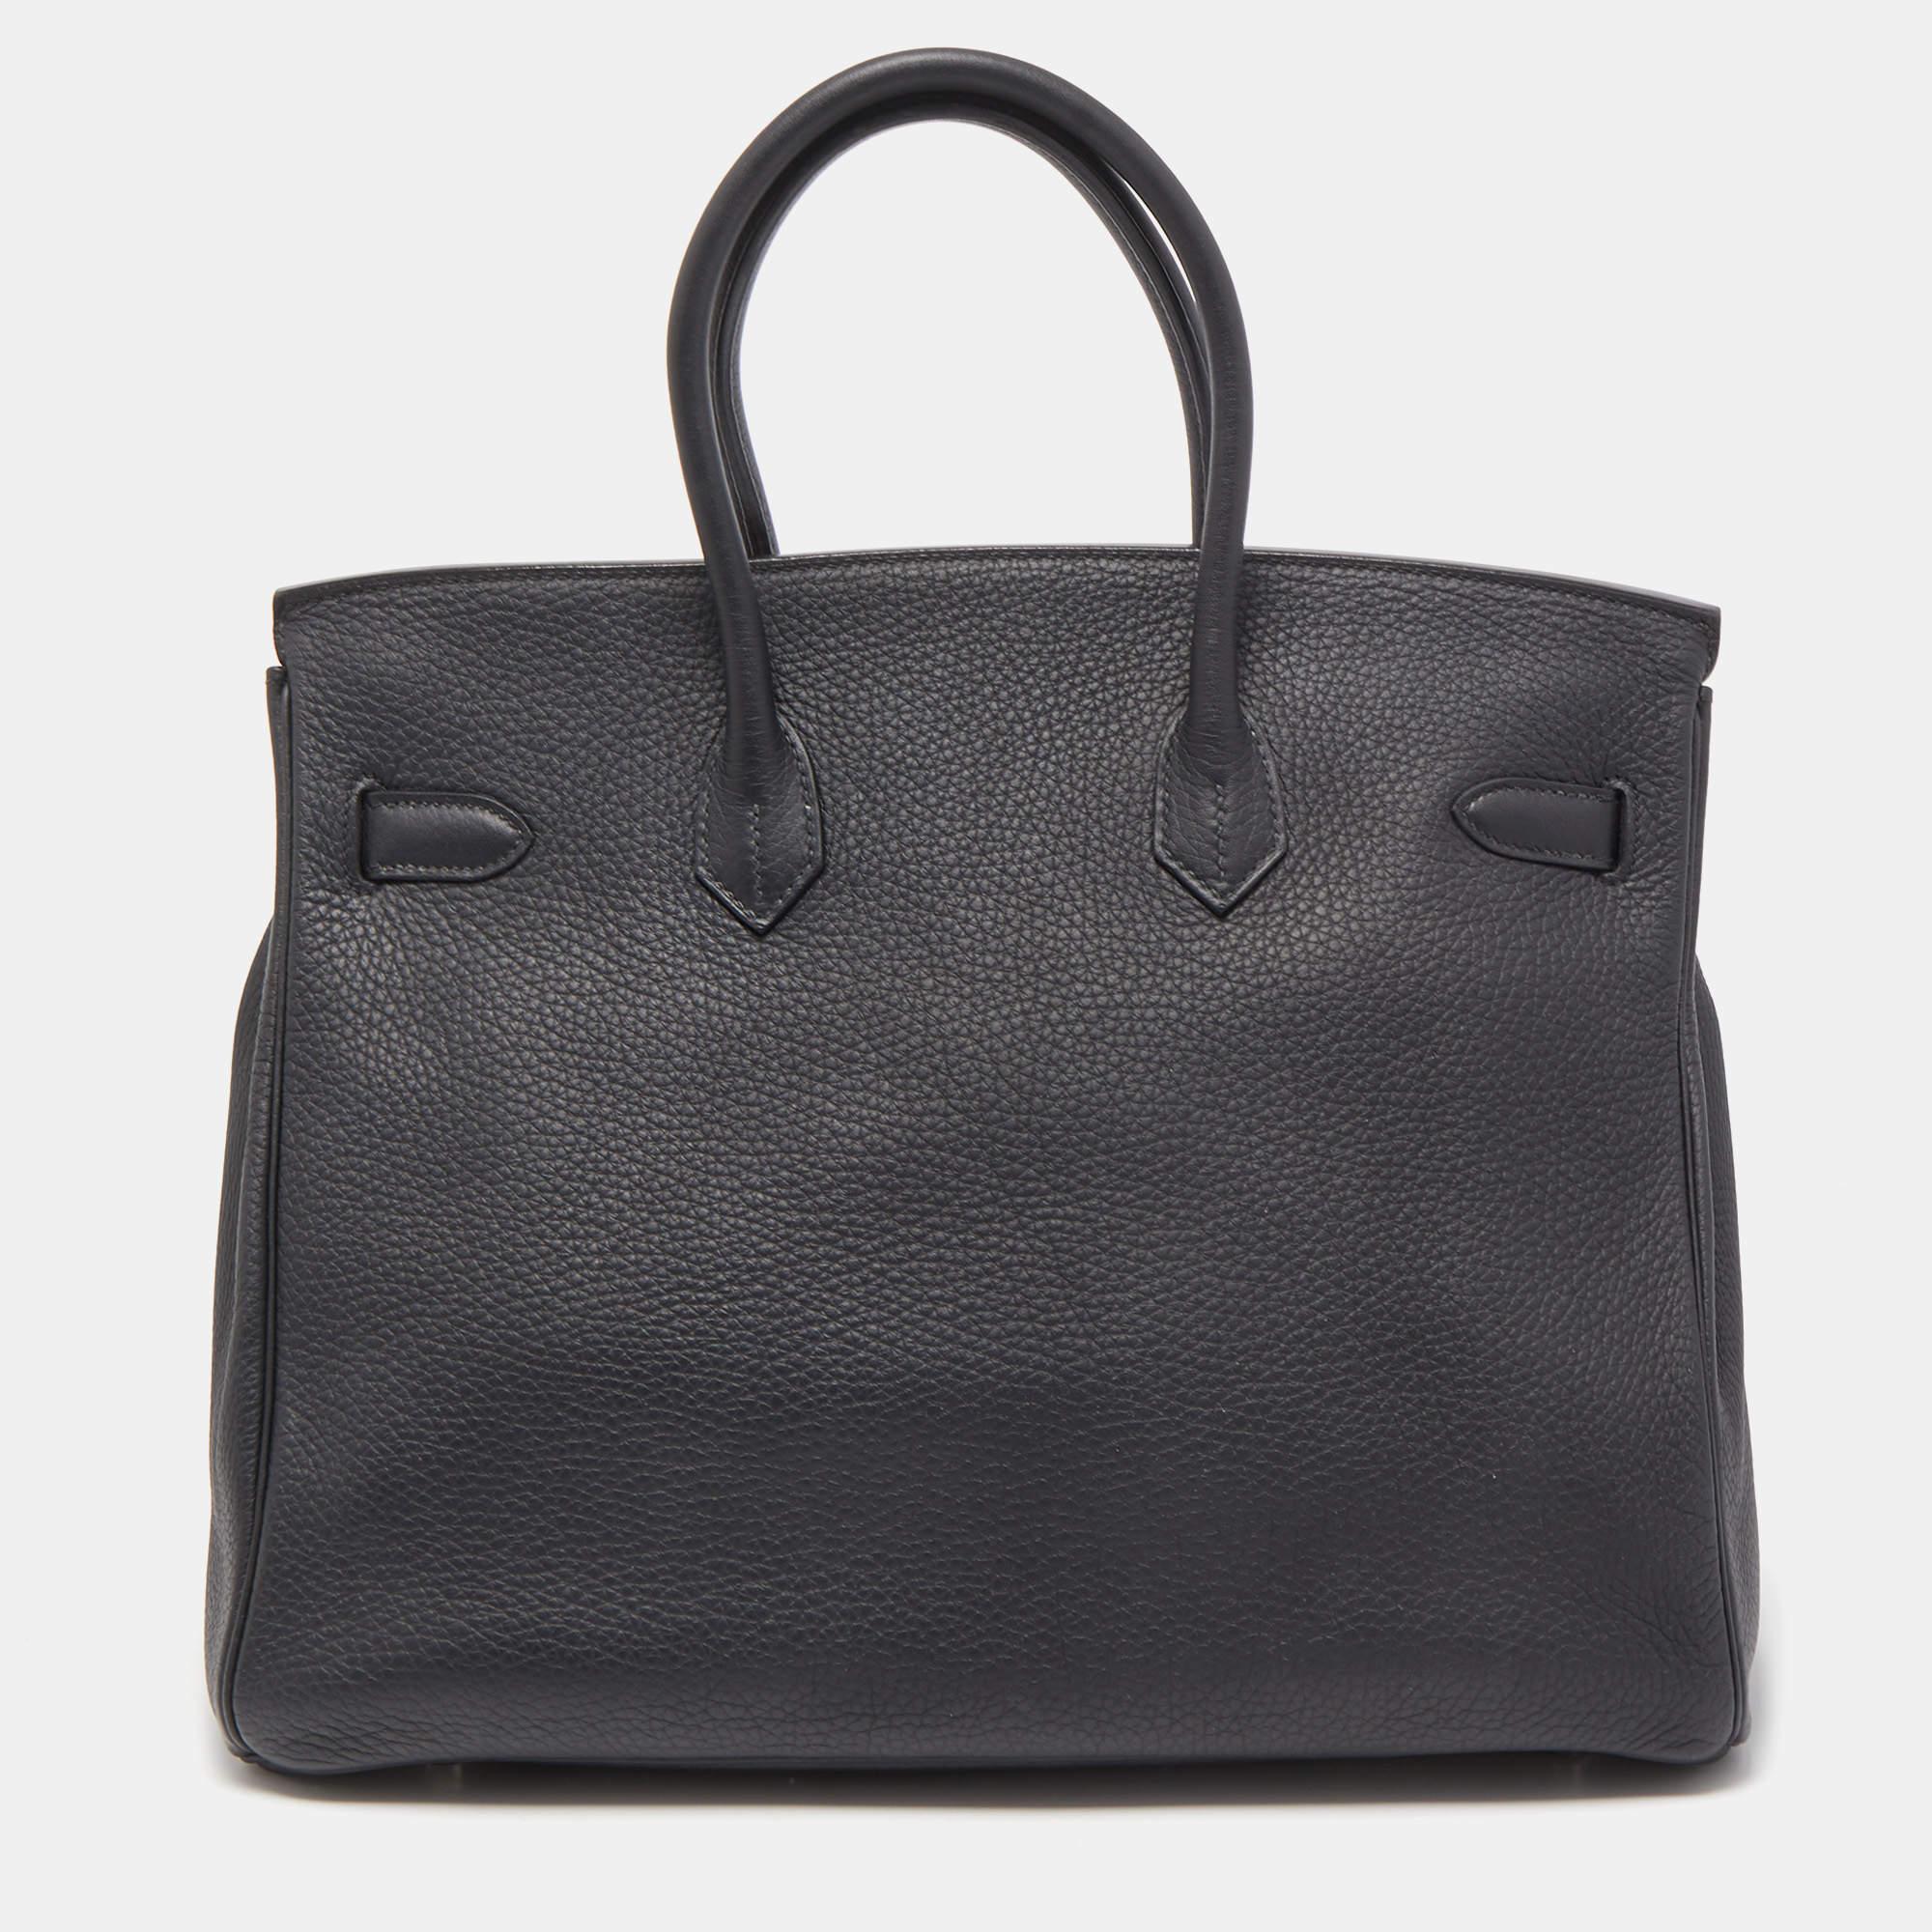 If you've been wishing to own an authentic Birkin bag, there is no better time to buy the coveted work of art than now. Here, we have this black Togo Birkin 35 just for you. Crafted in France from Togo leather, the bag features dual top handles and